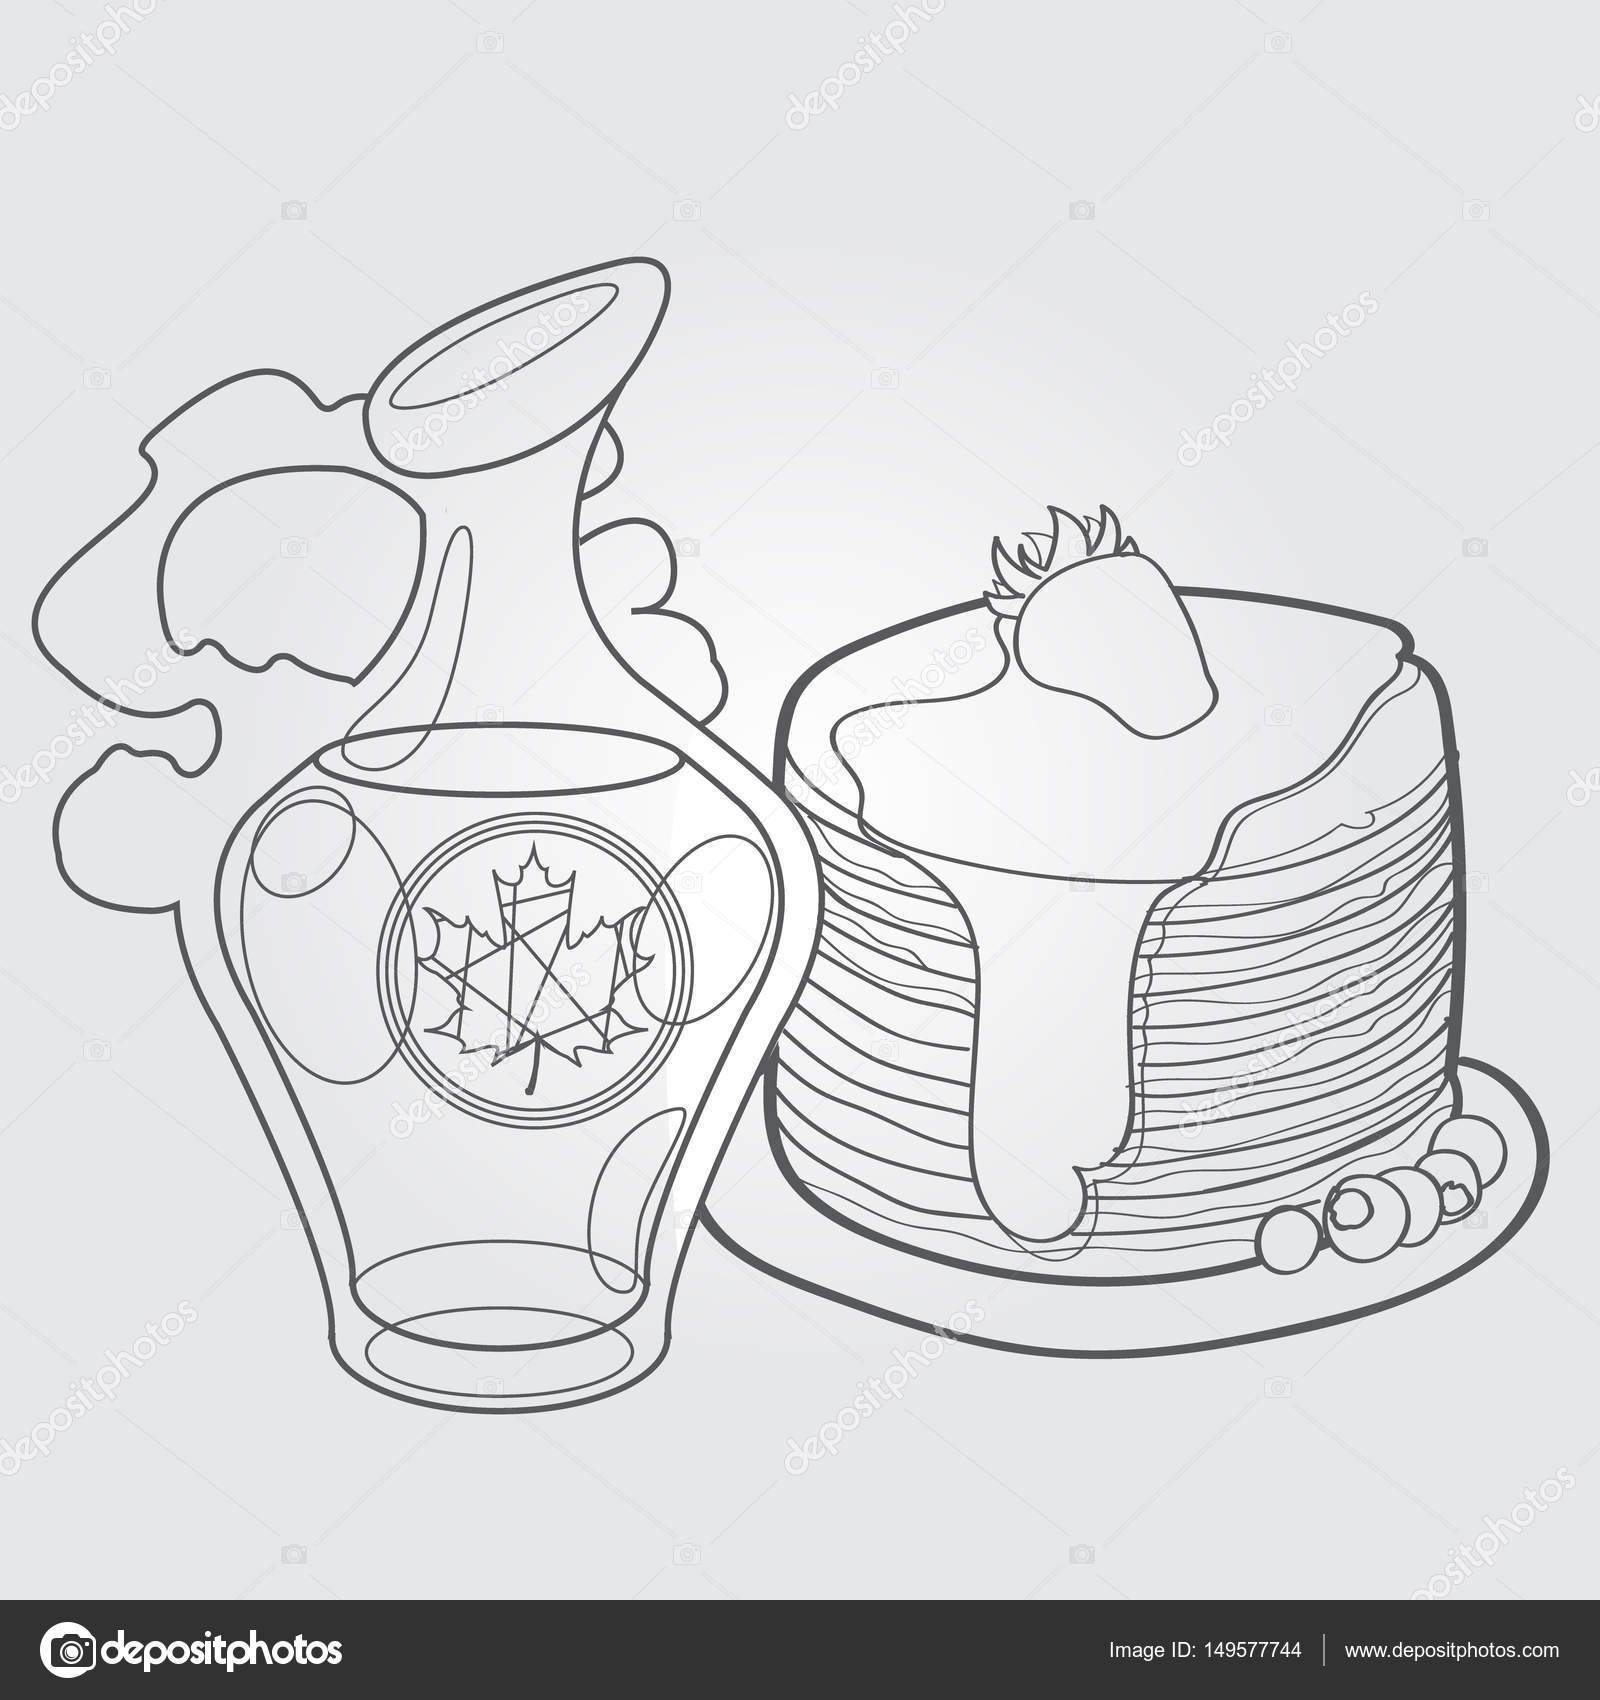 Maple Syrup Coloring Pages at GetColorings.com | Free printable